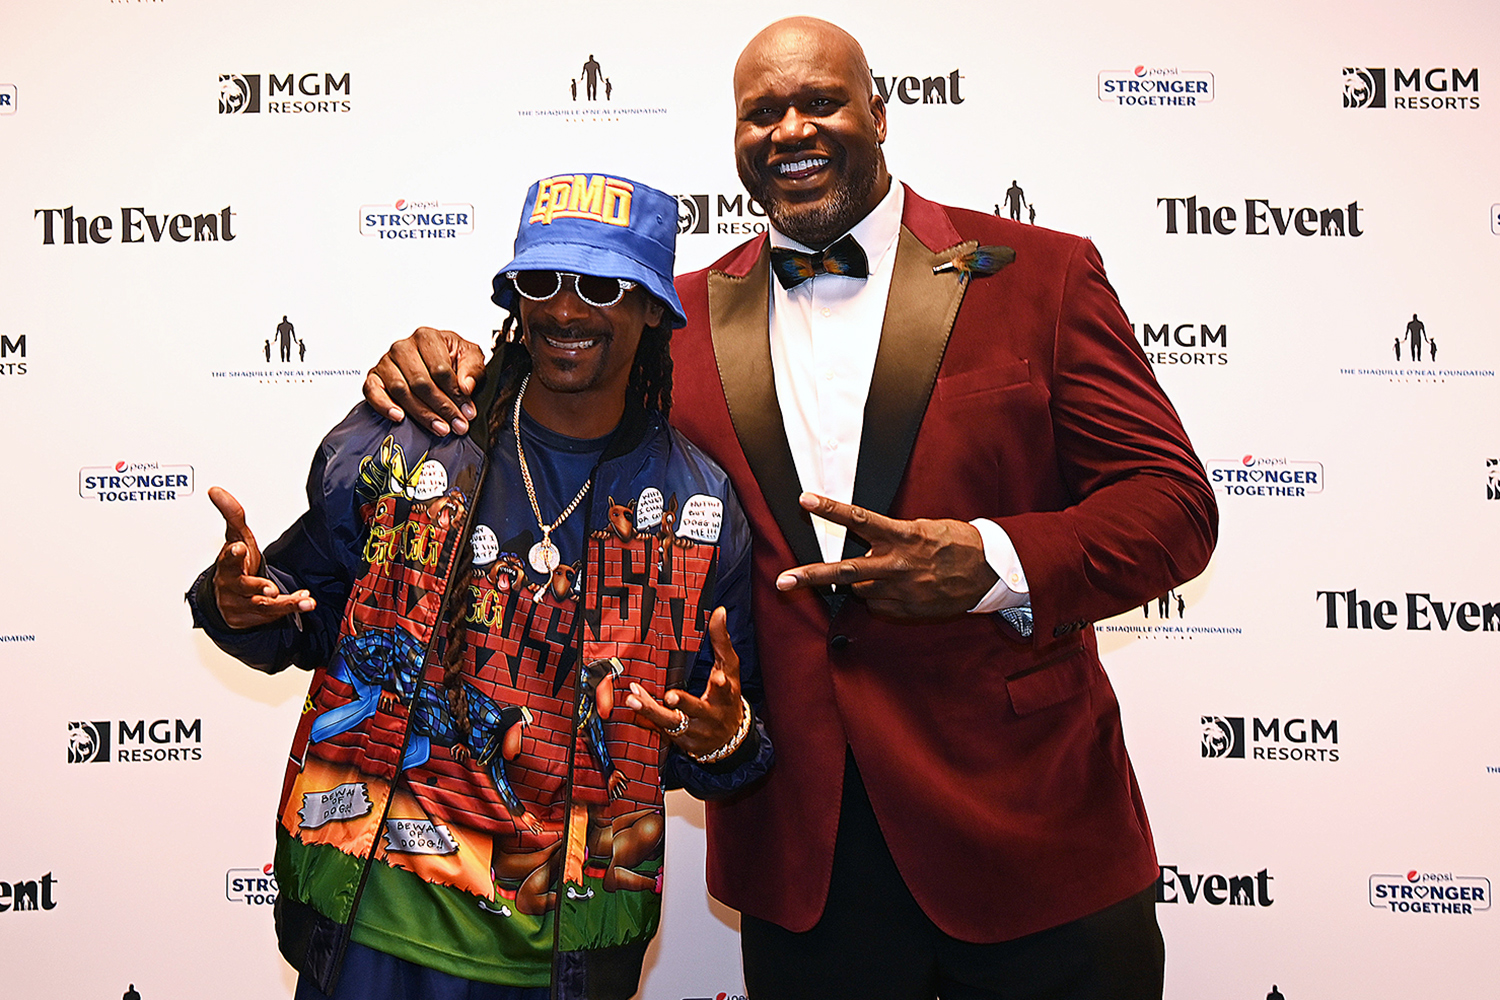 Snoop Dogg and Shaquille O'Neal